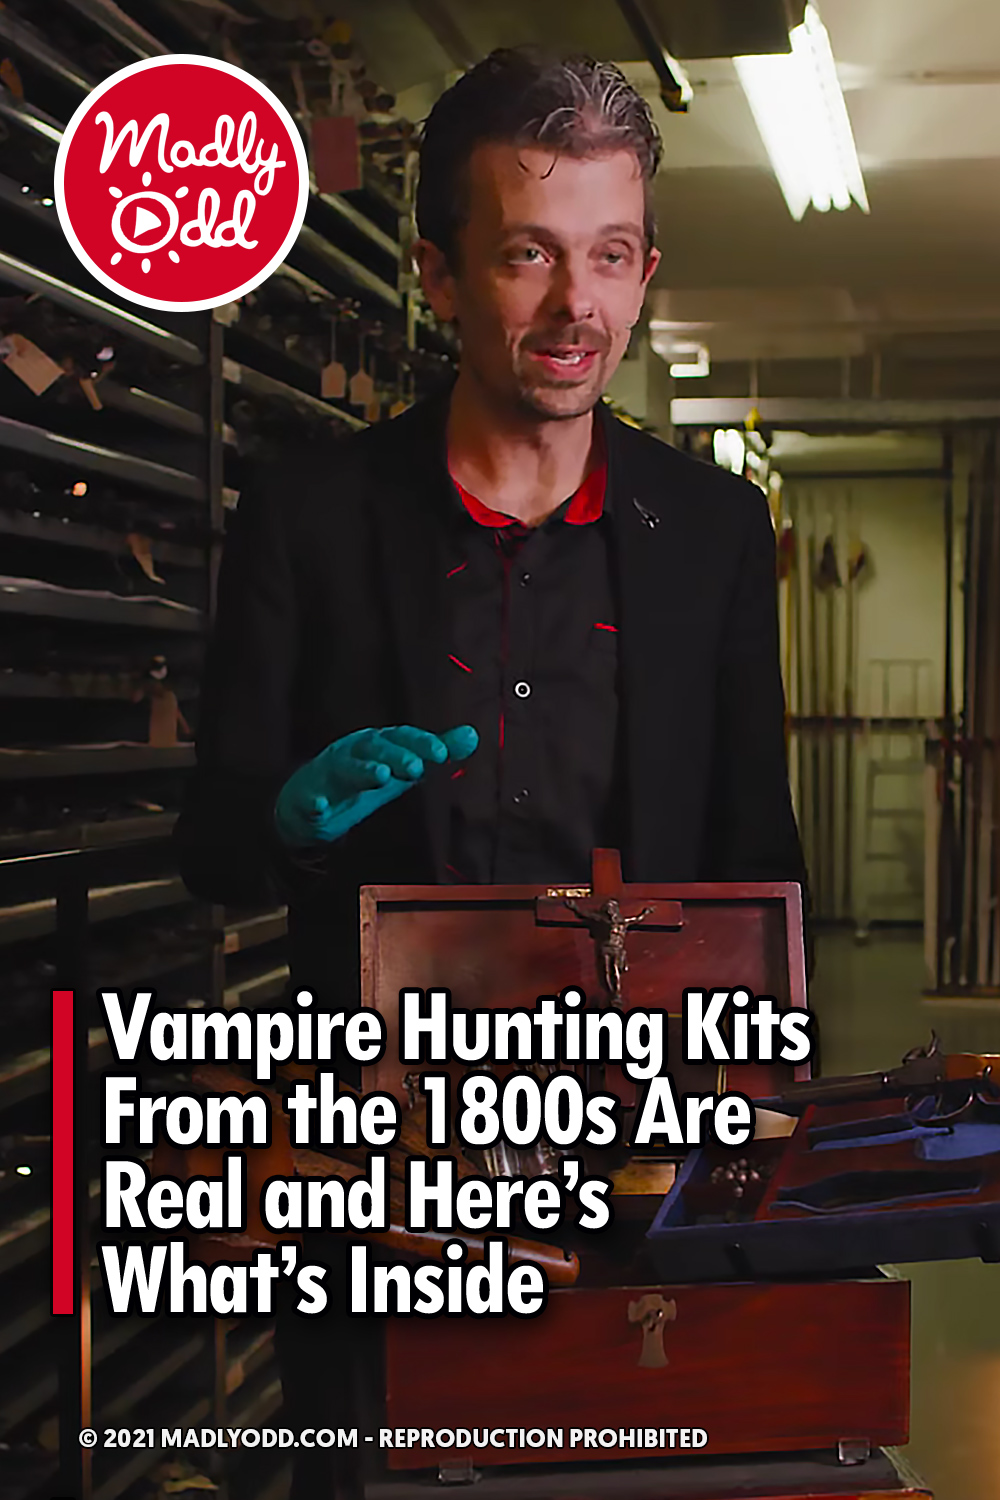 Vampire Hunting Kits From the 1800s Are Real and Here’s What’s Inside